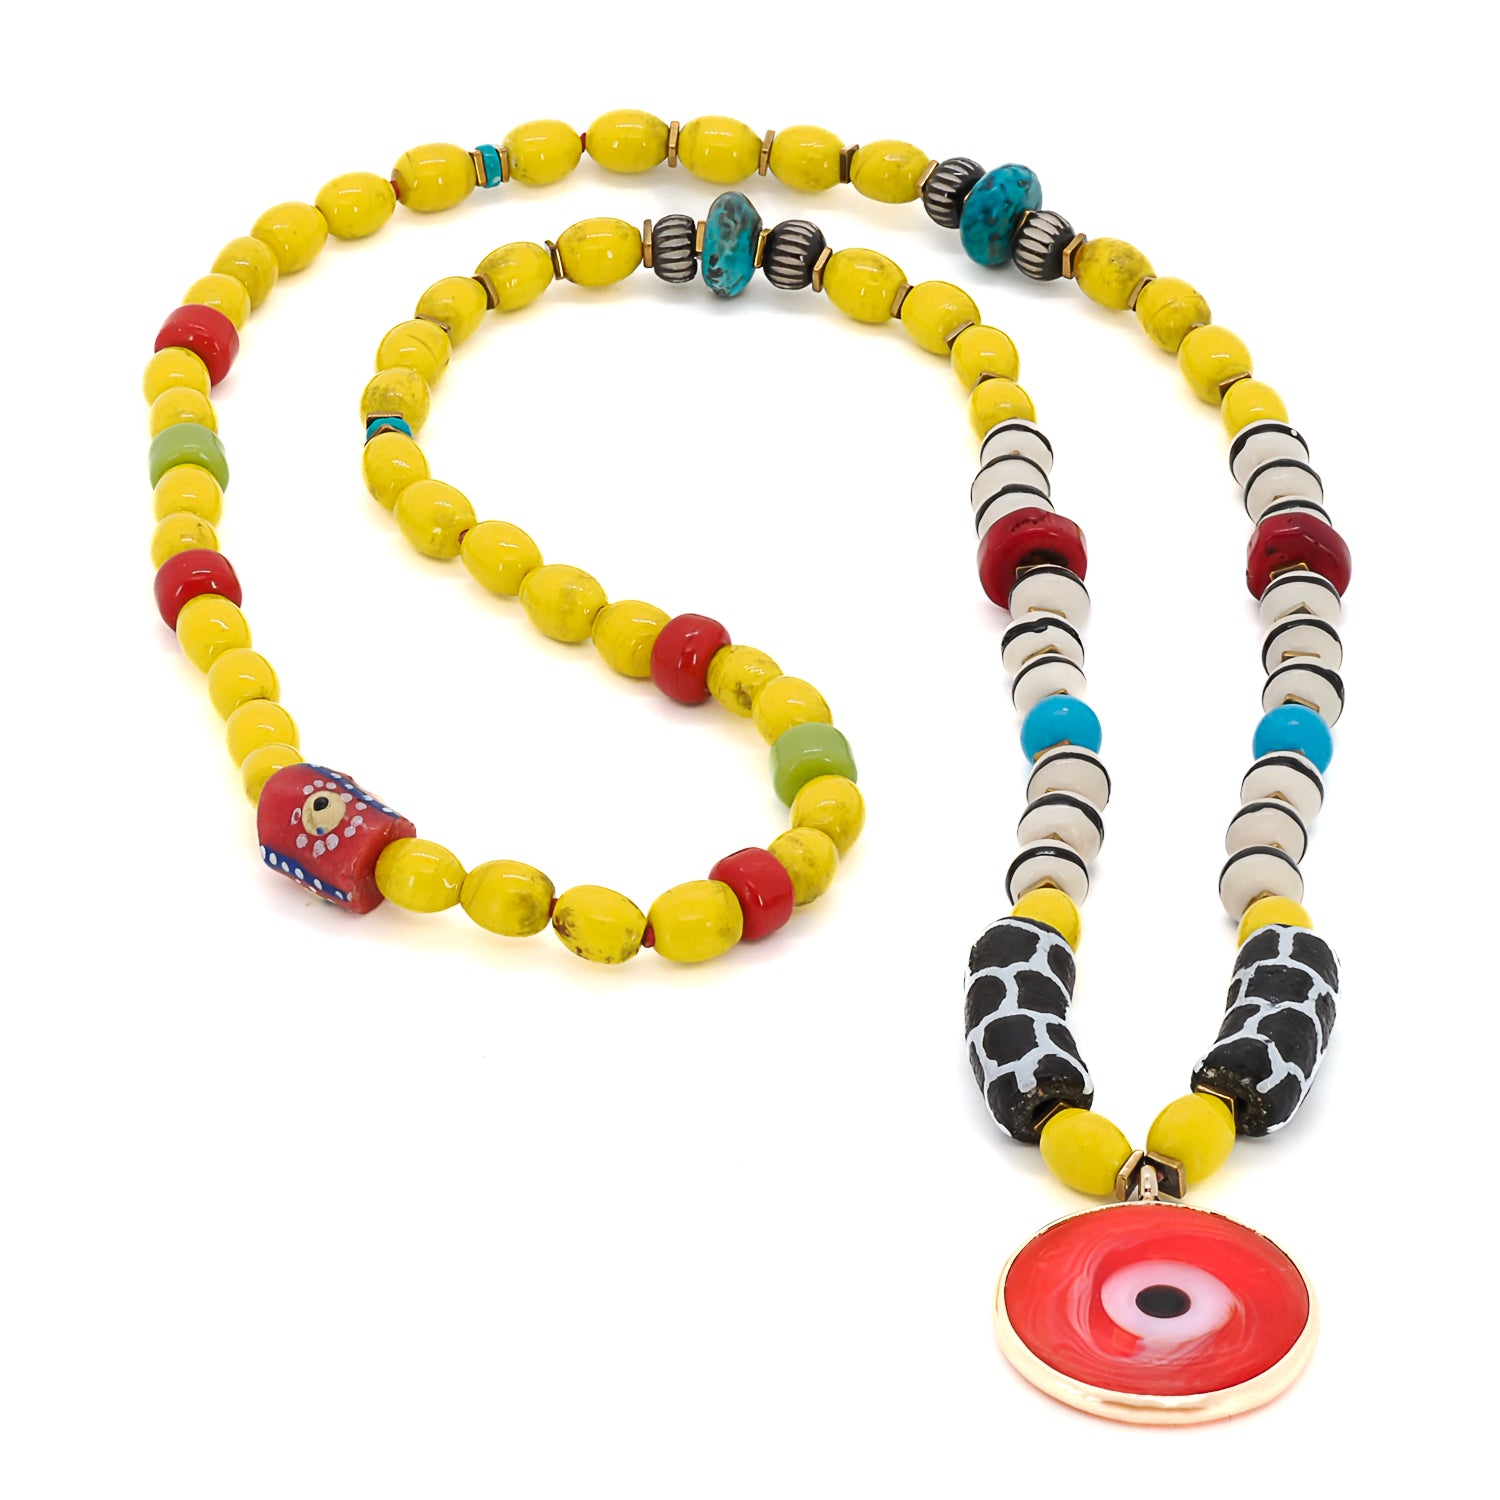 Detailed shot of the handmade ceramic black and white beads used in the African Yellow Happiness Necklace.